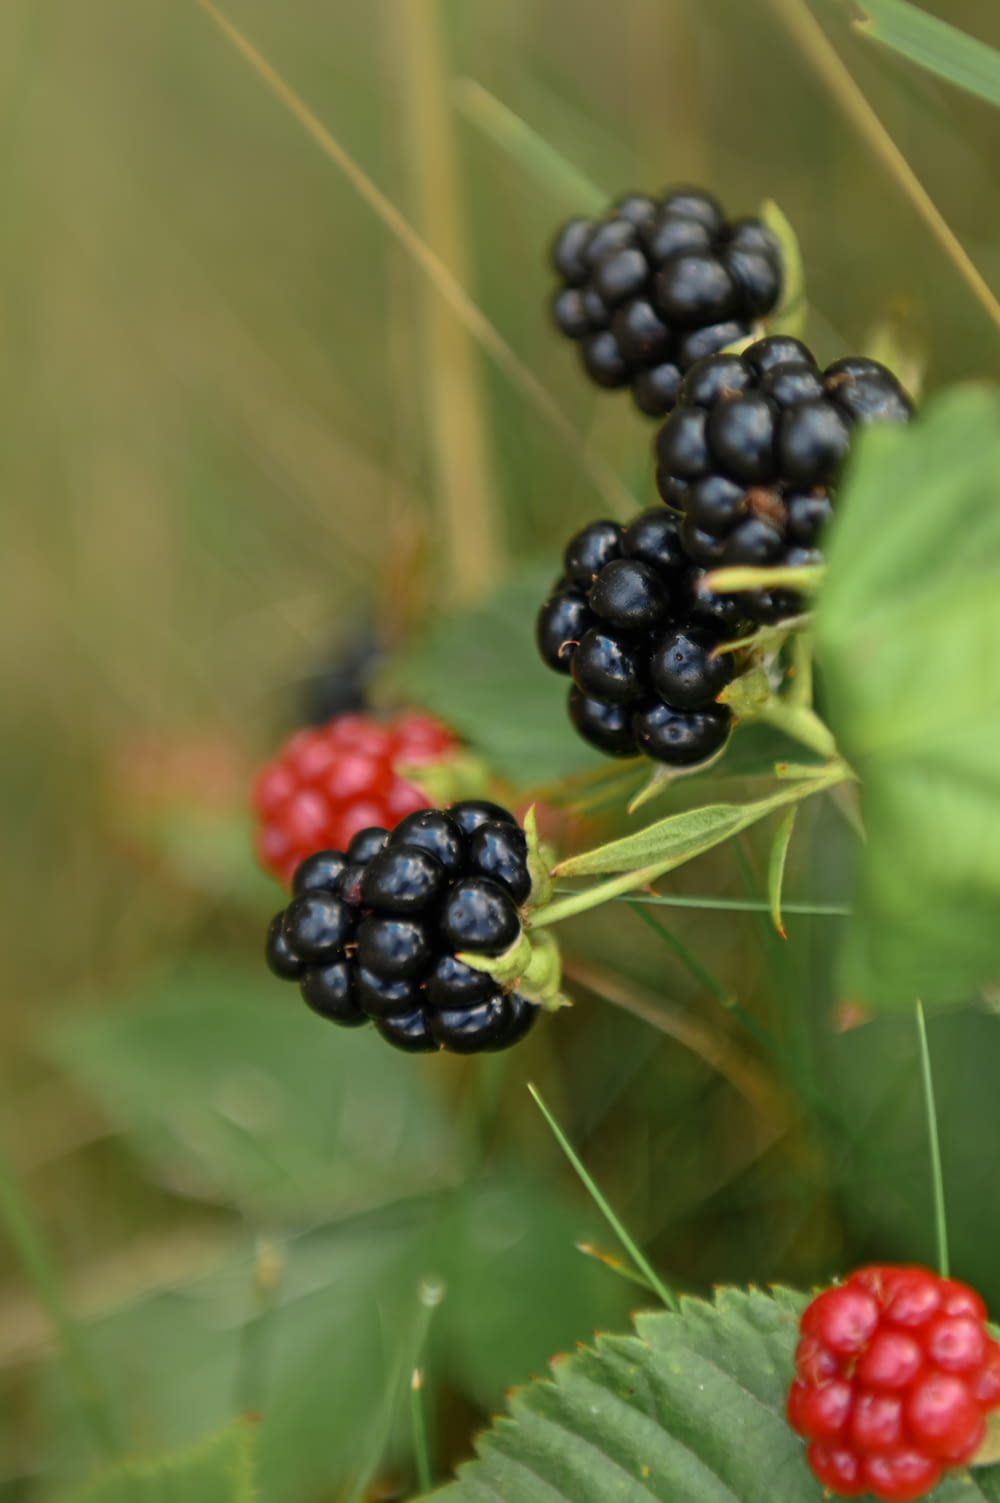 a close up of berries on a plant with leaves